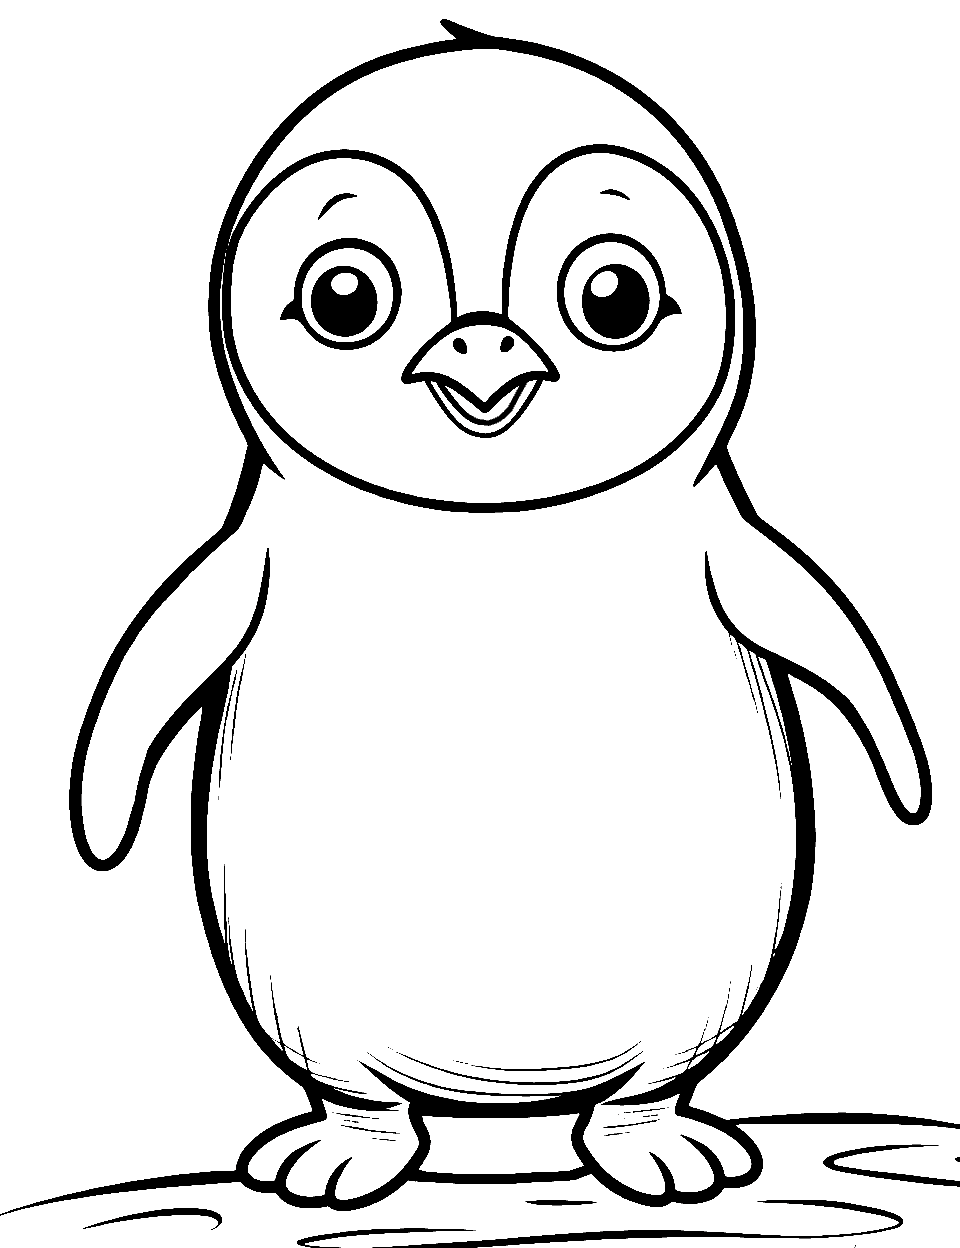 Penguin coloring pages free printable sheets